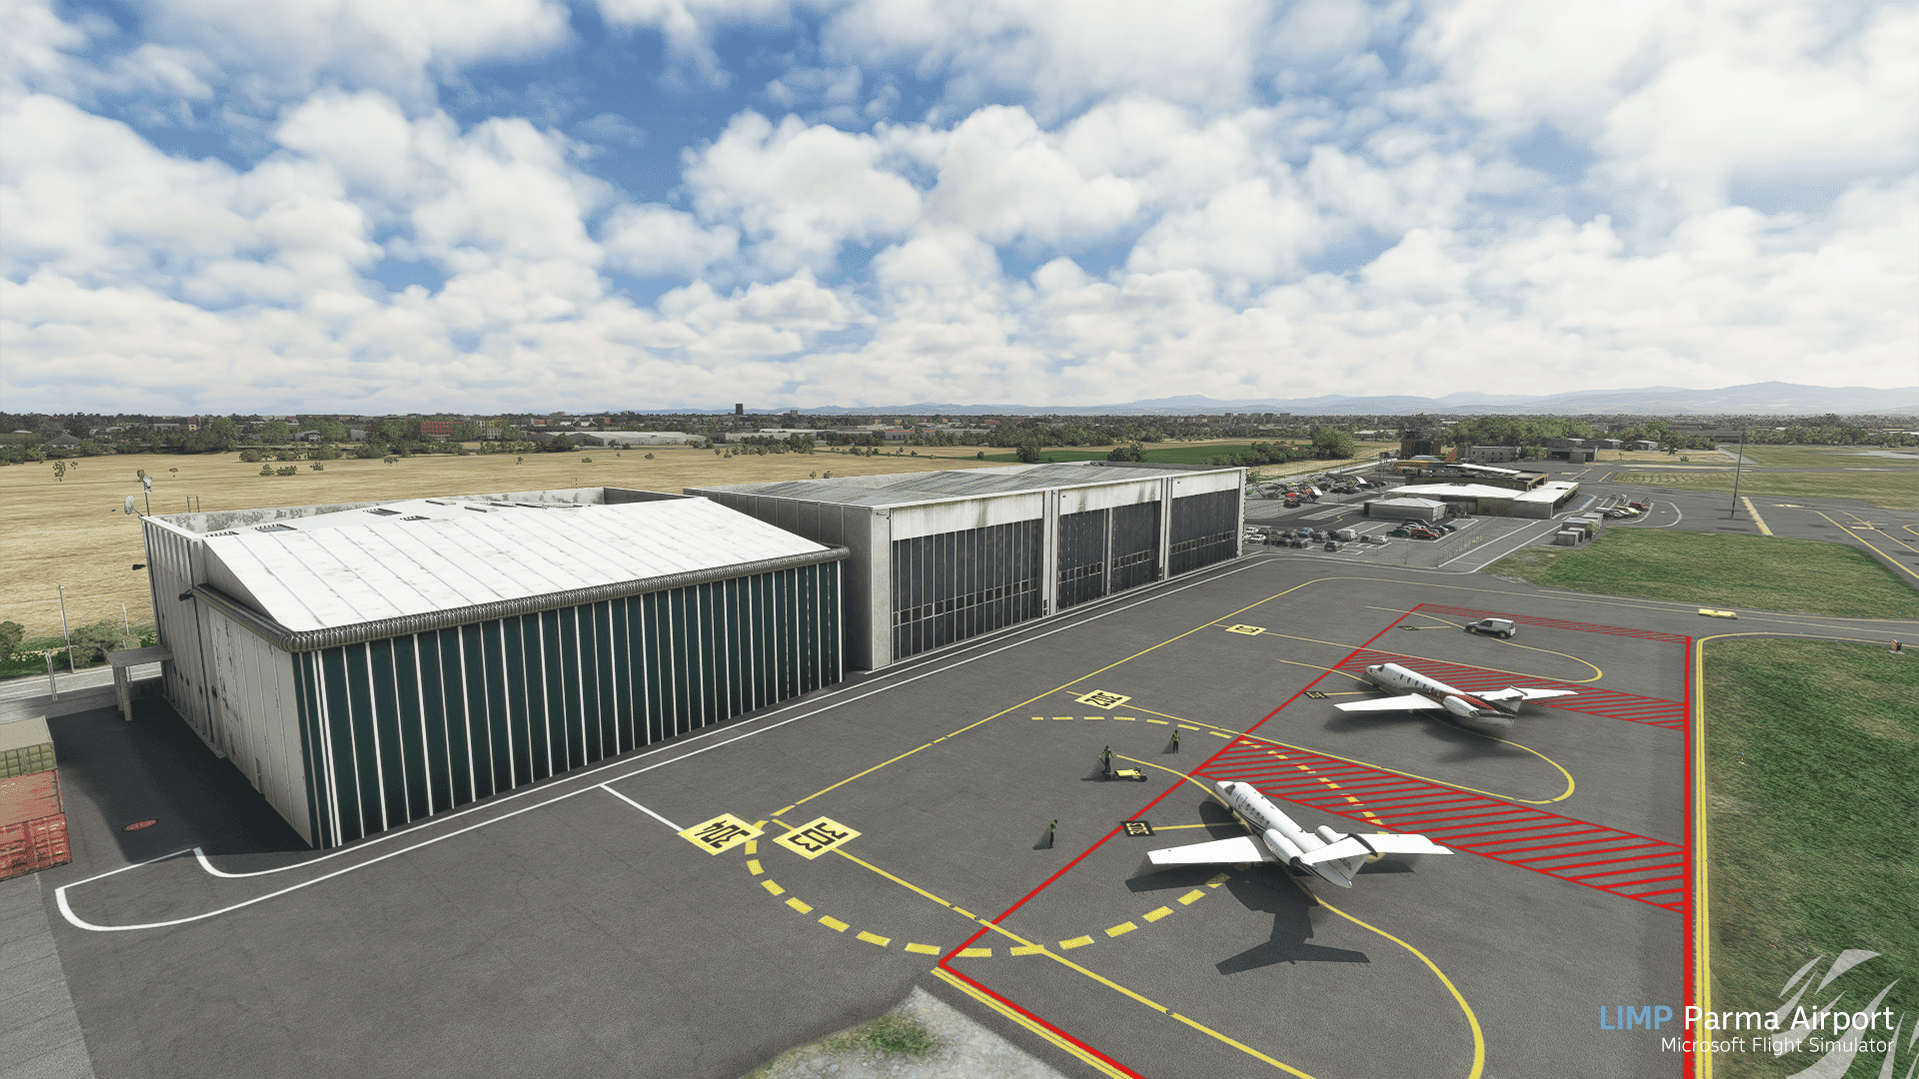 M'M Simulations Releases Parma Airport for MSFS - M'M Simulations